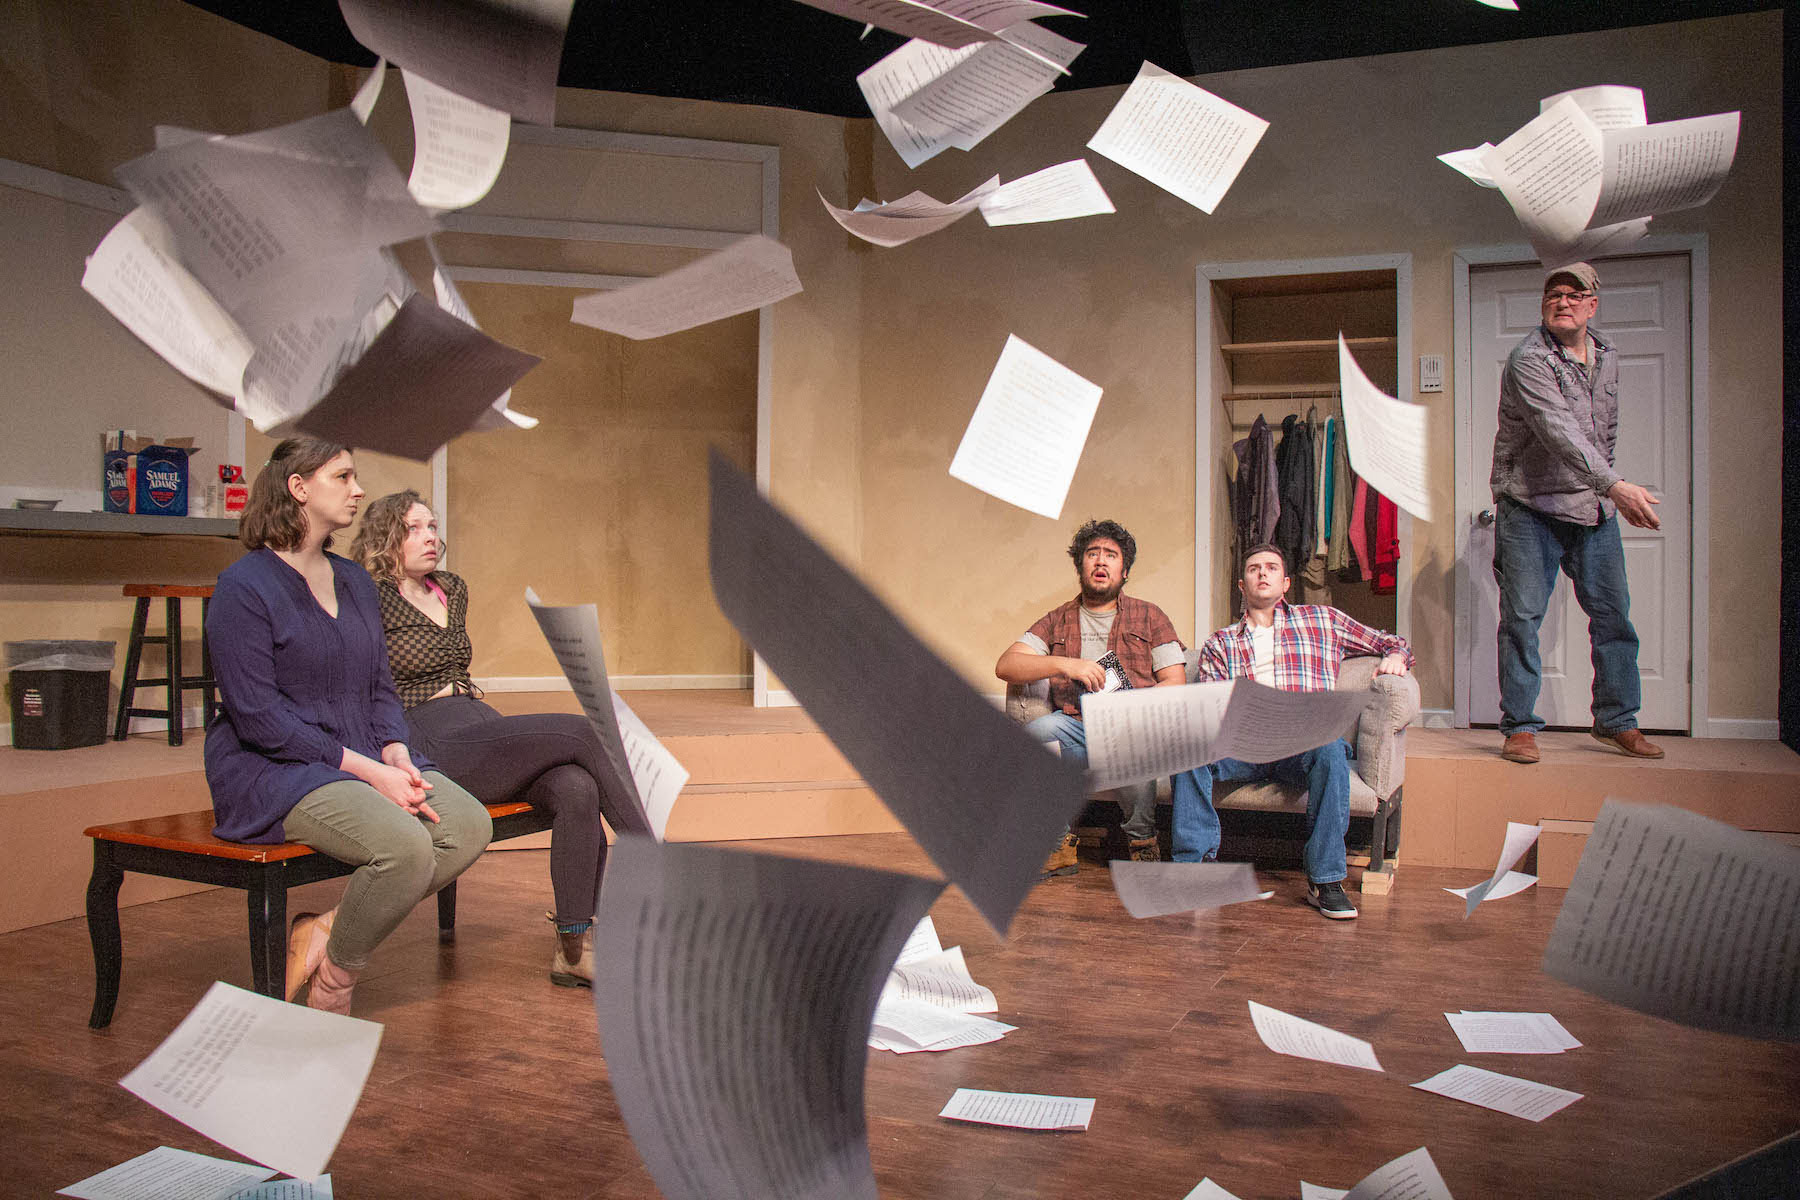 People sit in a room while papers fall around them